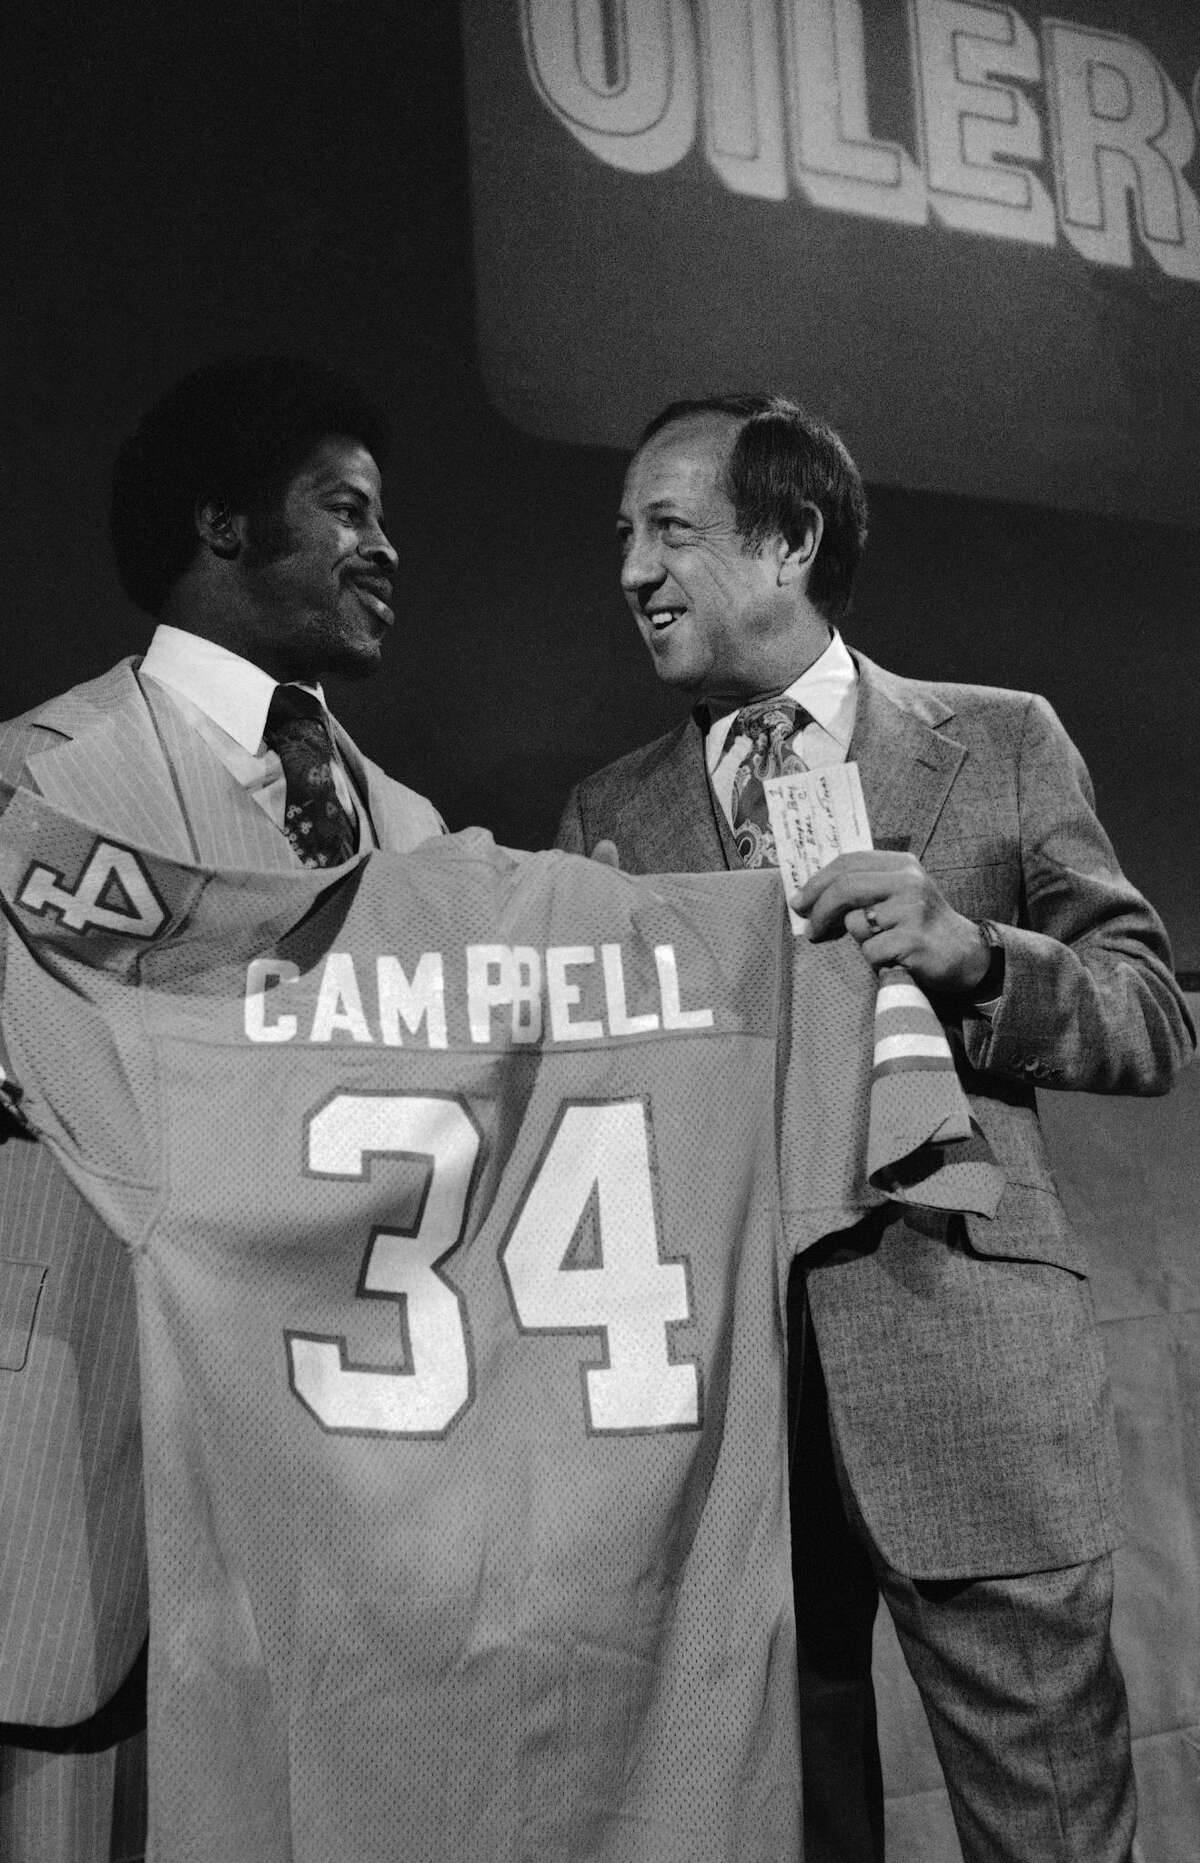 Earl Campbell, No. 1 draft choice of the Houston Oilers, at the NFL football draft with NFL Commissioner Pete Rozelle on May 2, 1978.